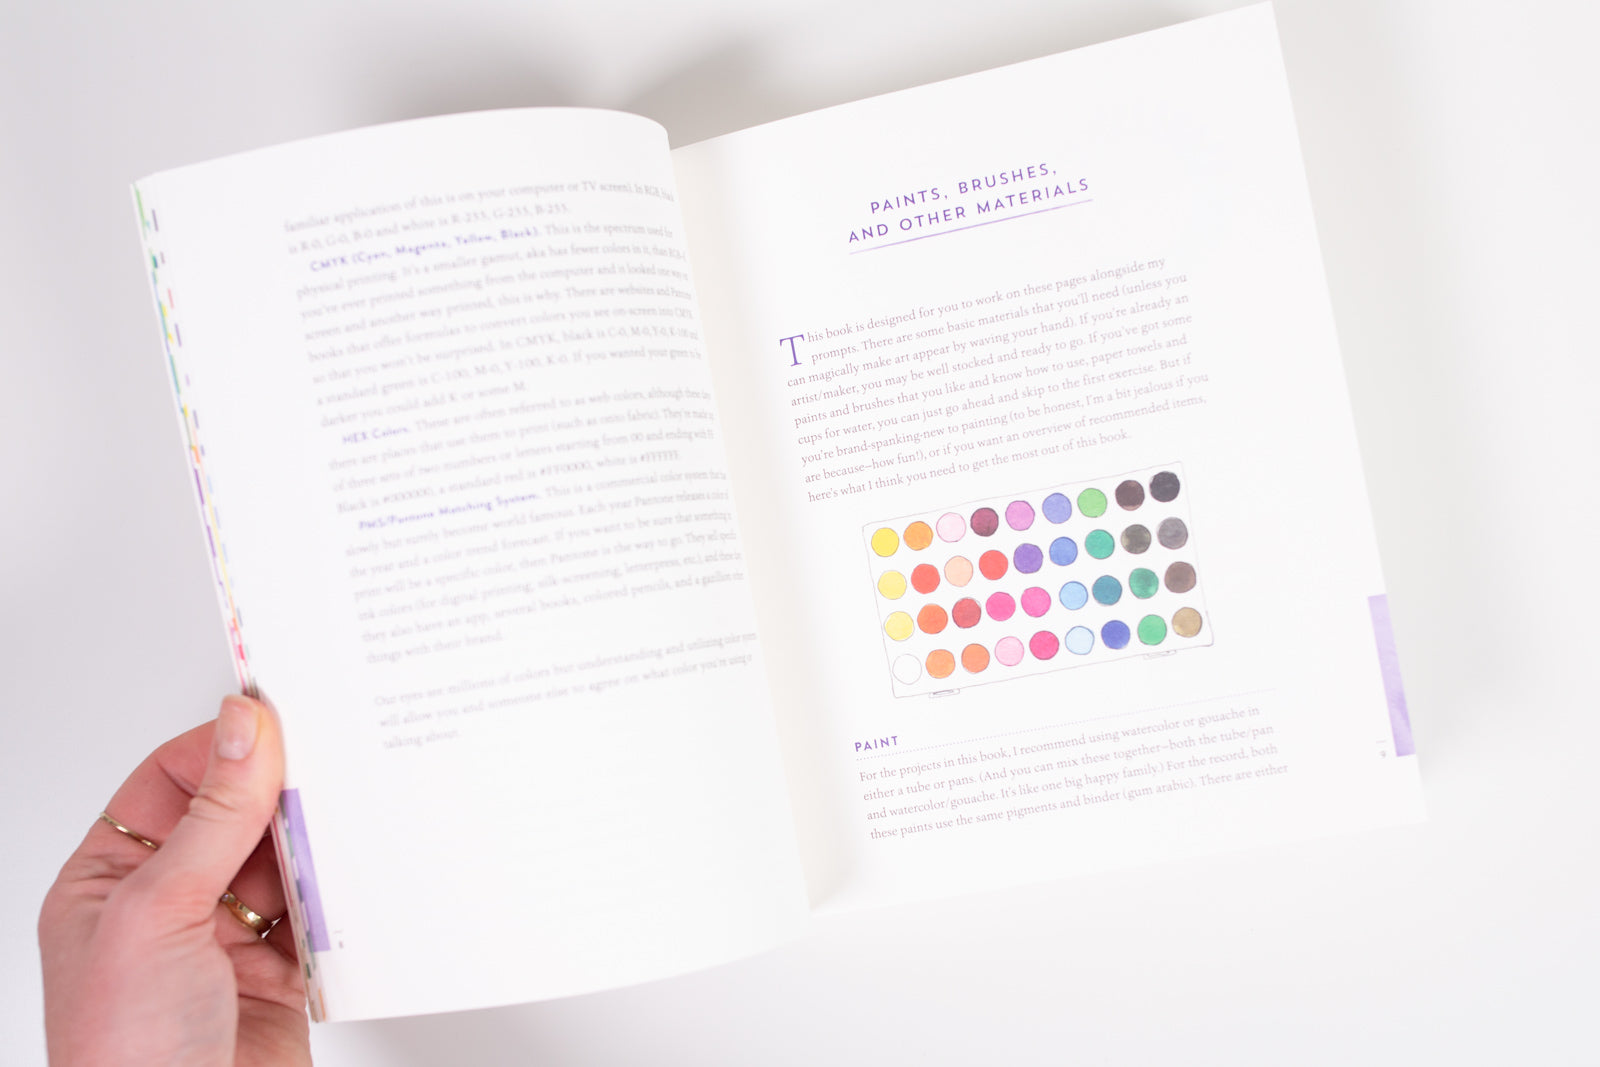 'A Field Guide to Color' by Lisa Solomon